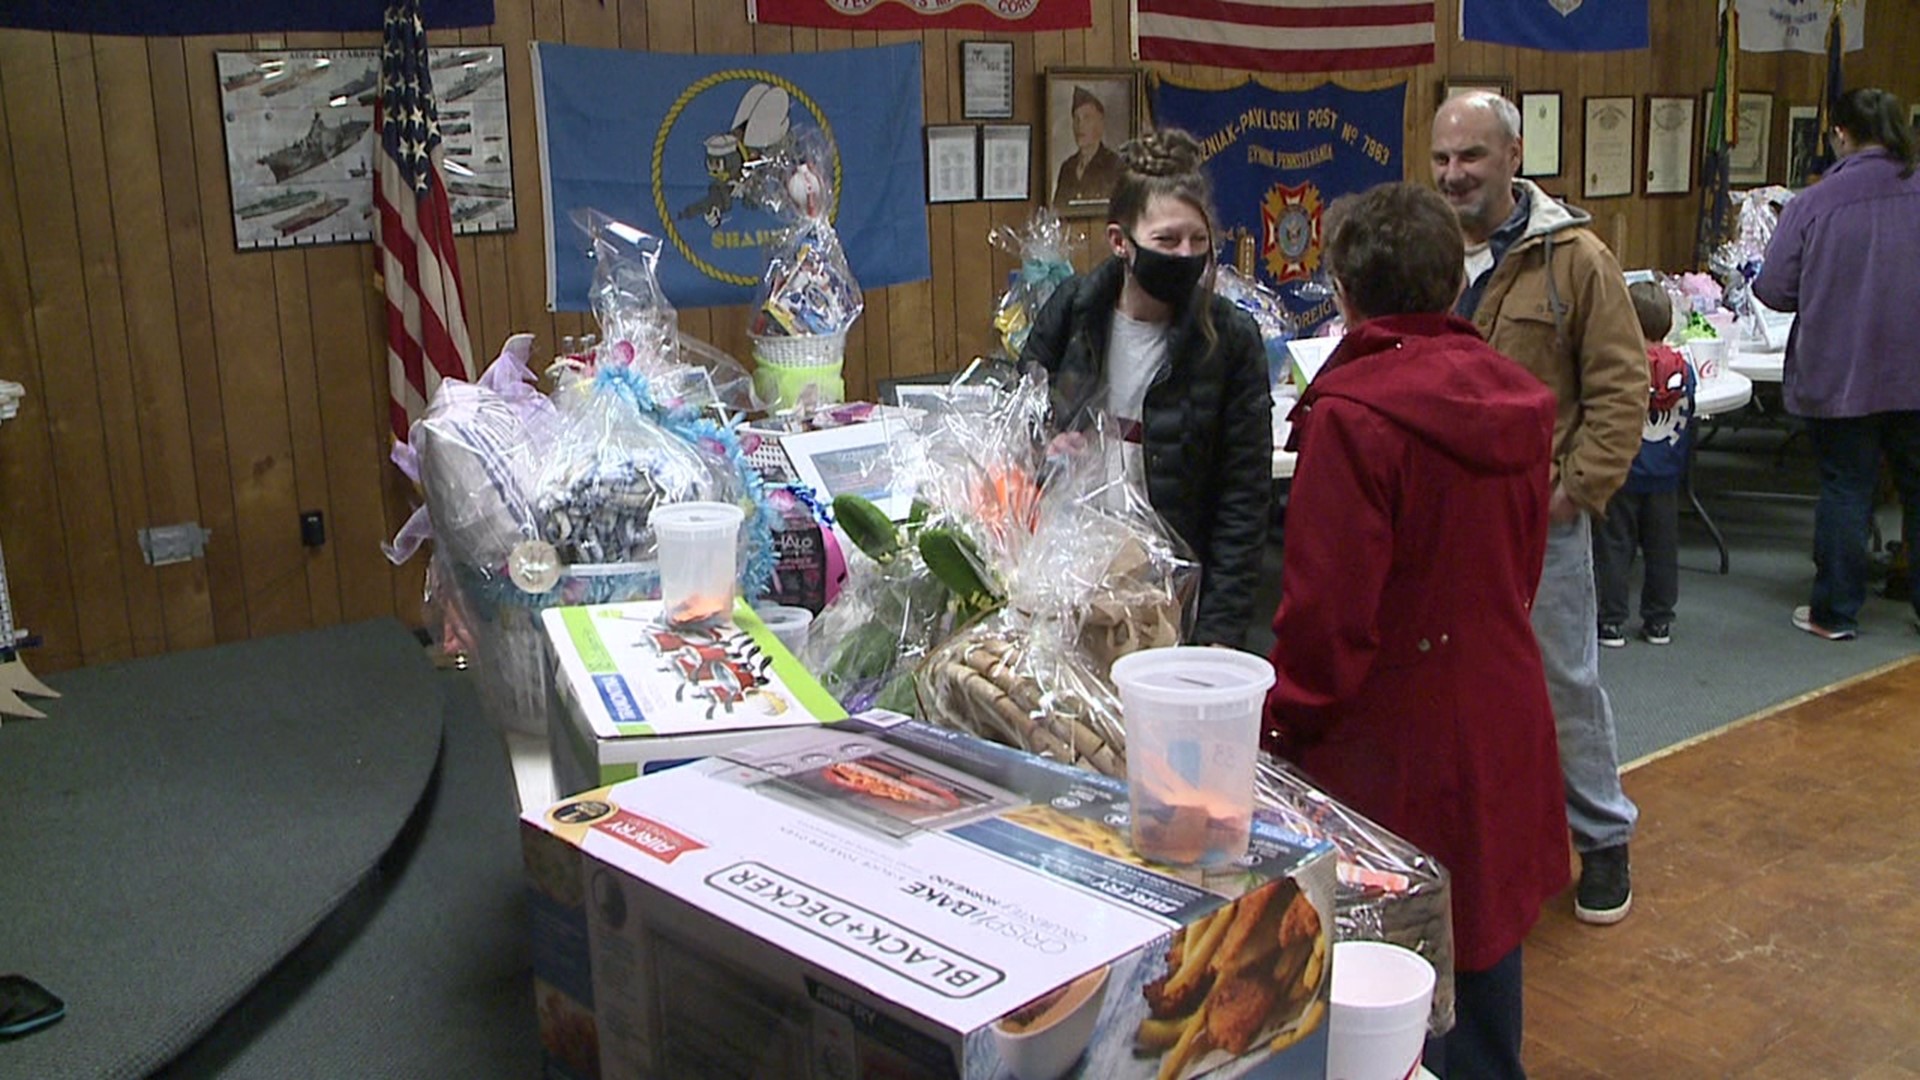 A pasta benefit dinner was held in Lackawanna County to help out a loved one.